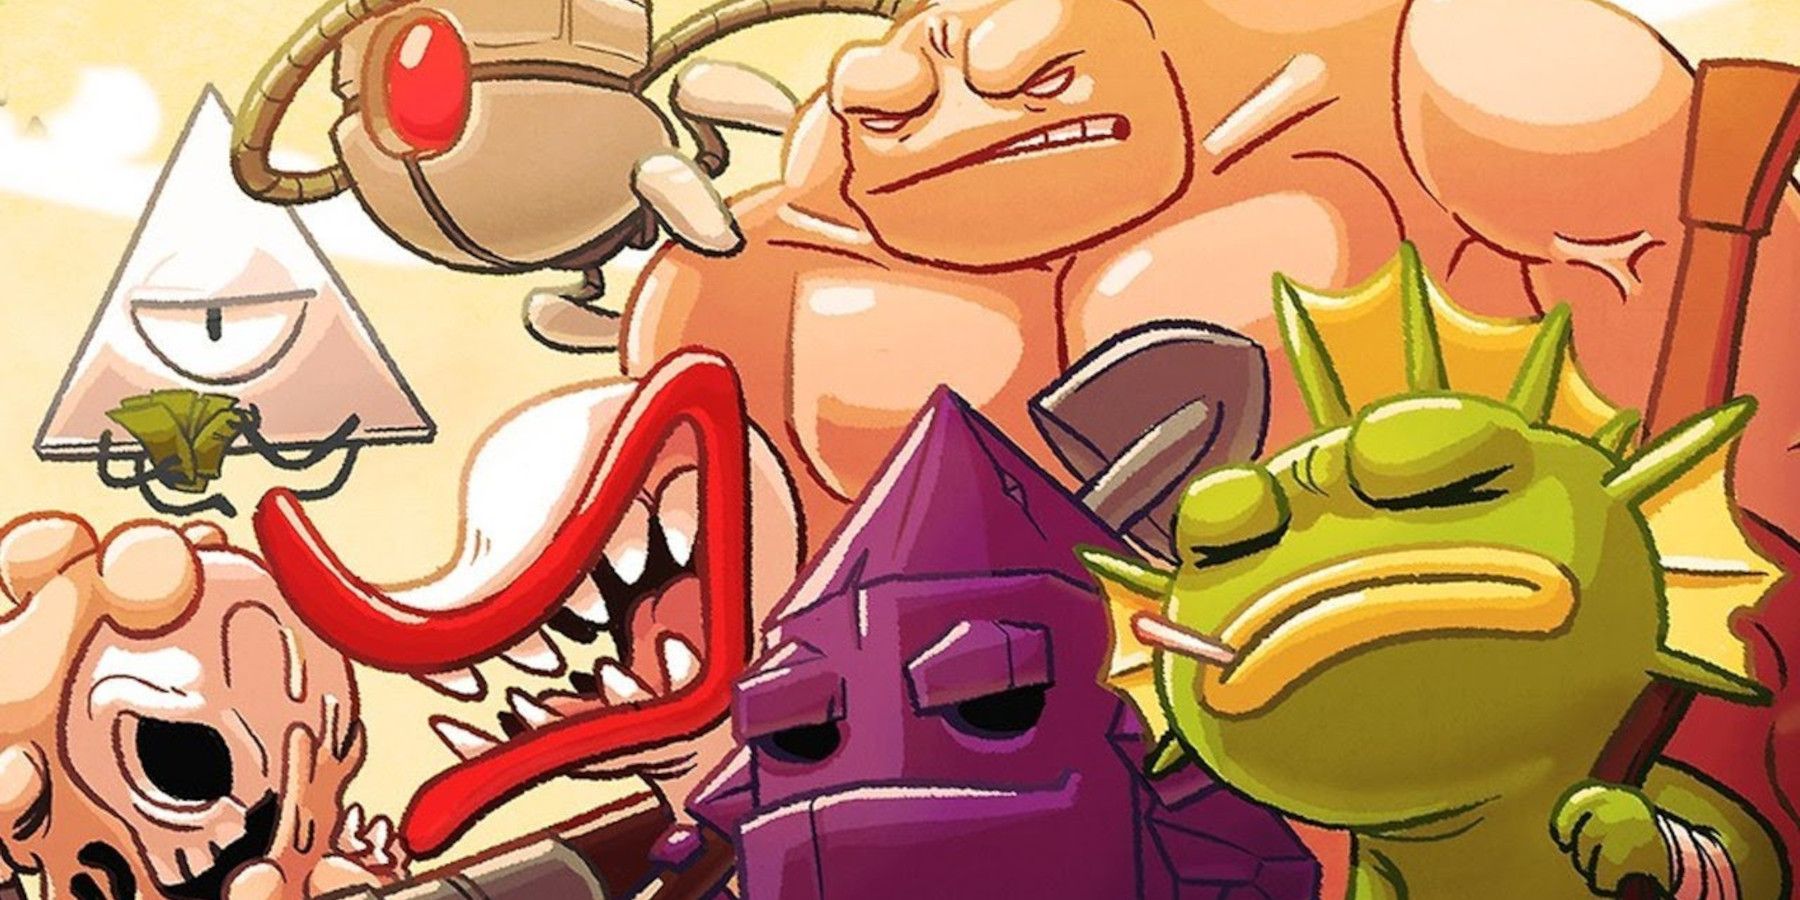 A group of characters from Nuclear Throne